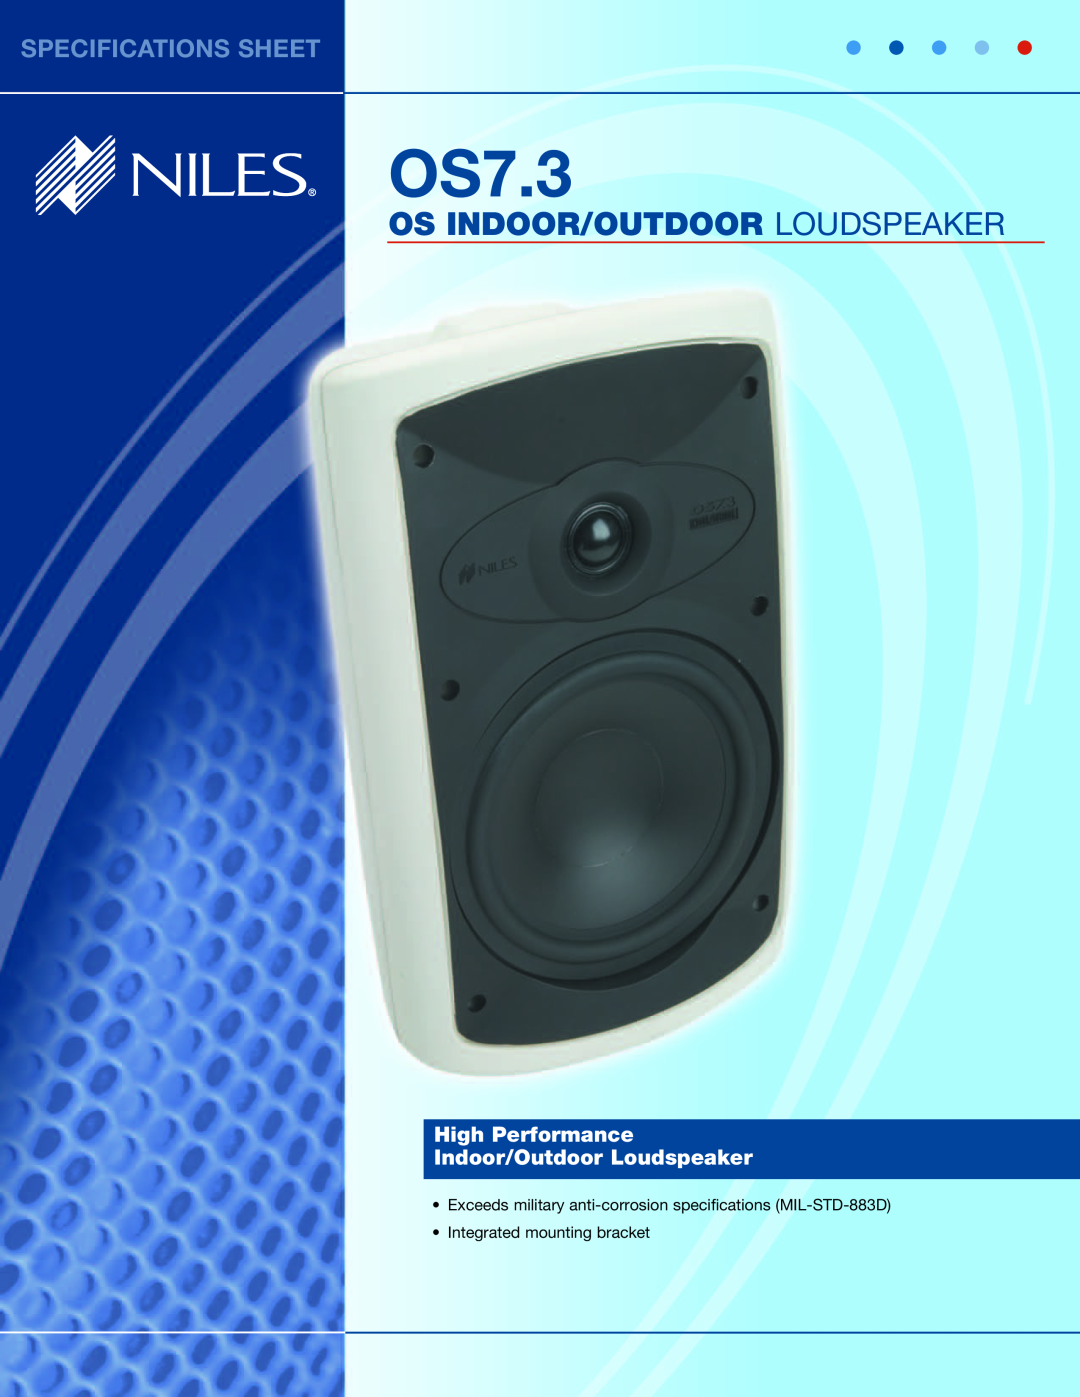 Niles Audio OS7.3 specifications Os Indoor/Outdoor Loudspeaker, Specifications Sheet 